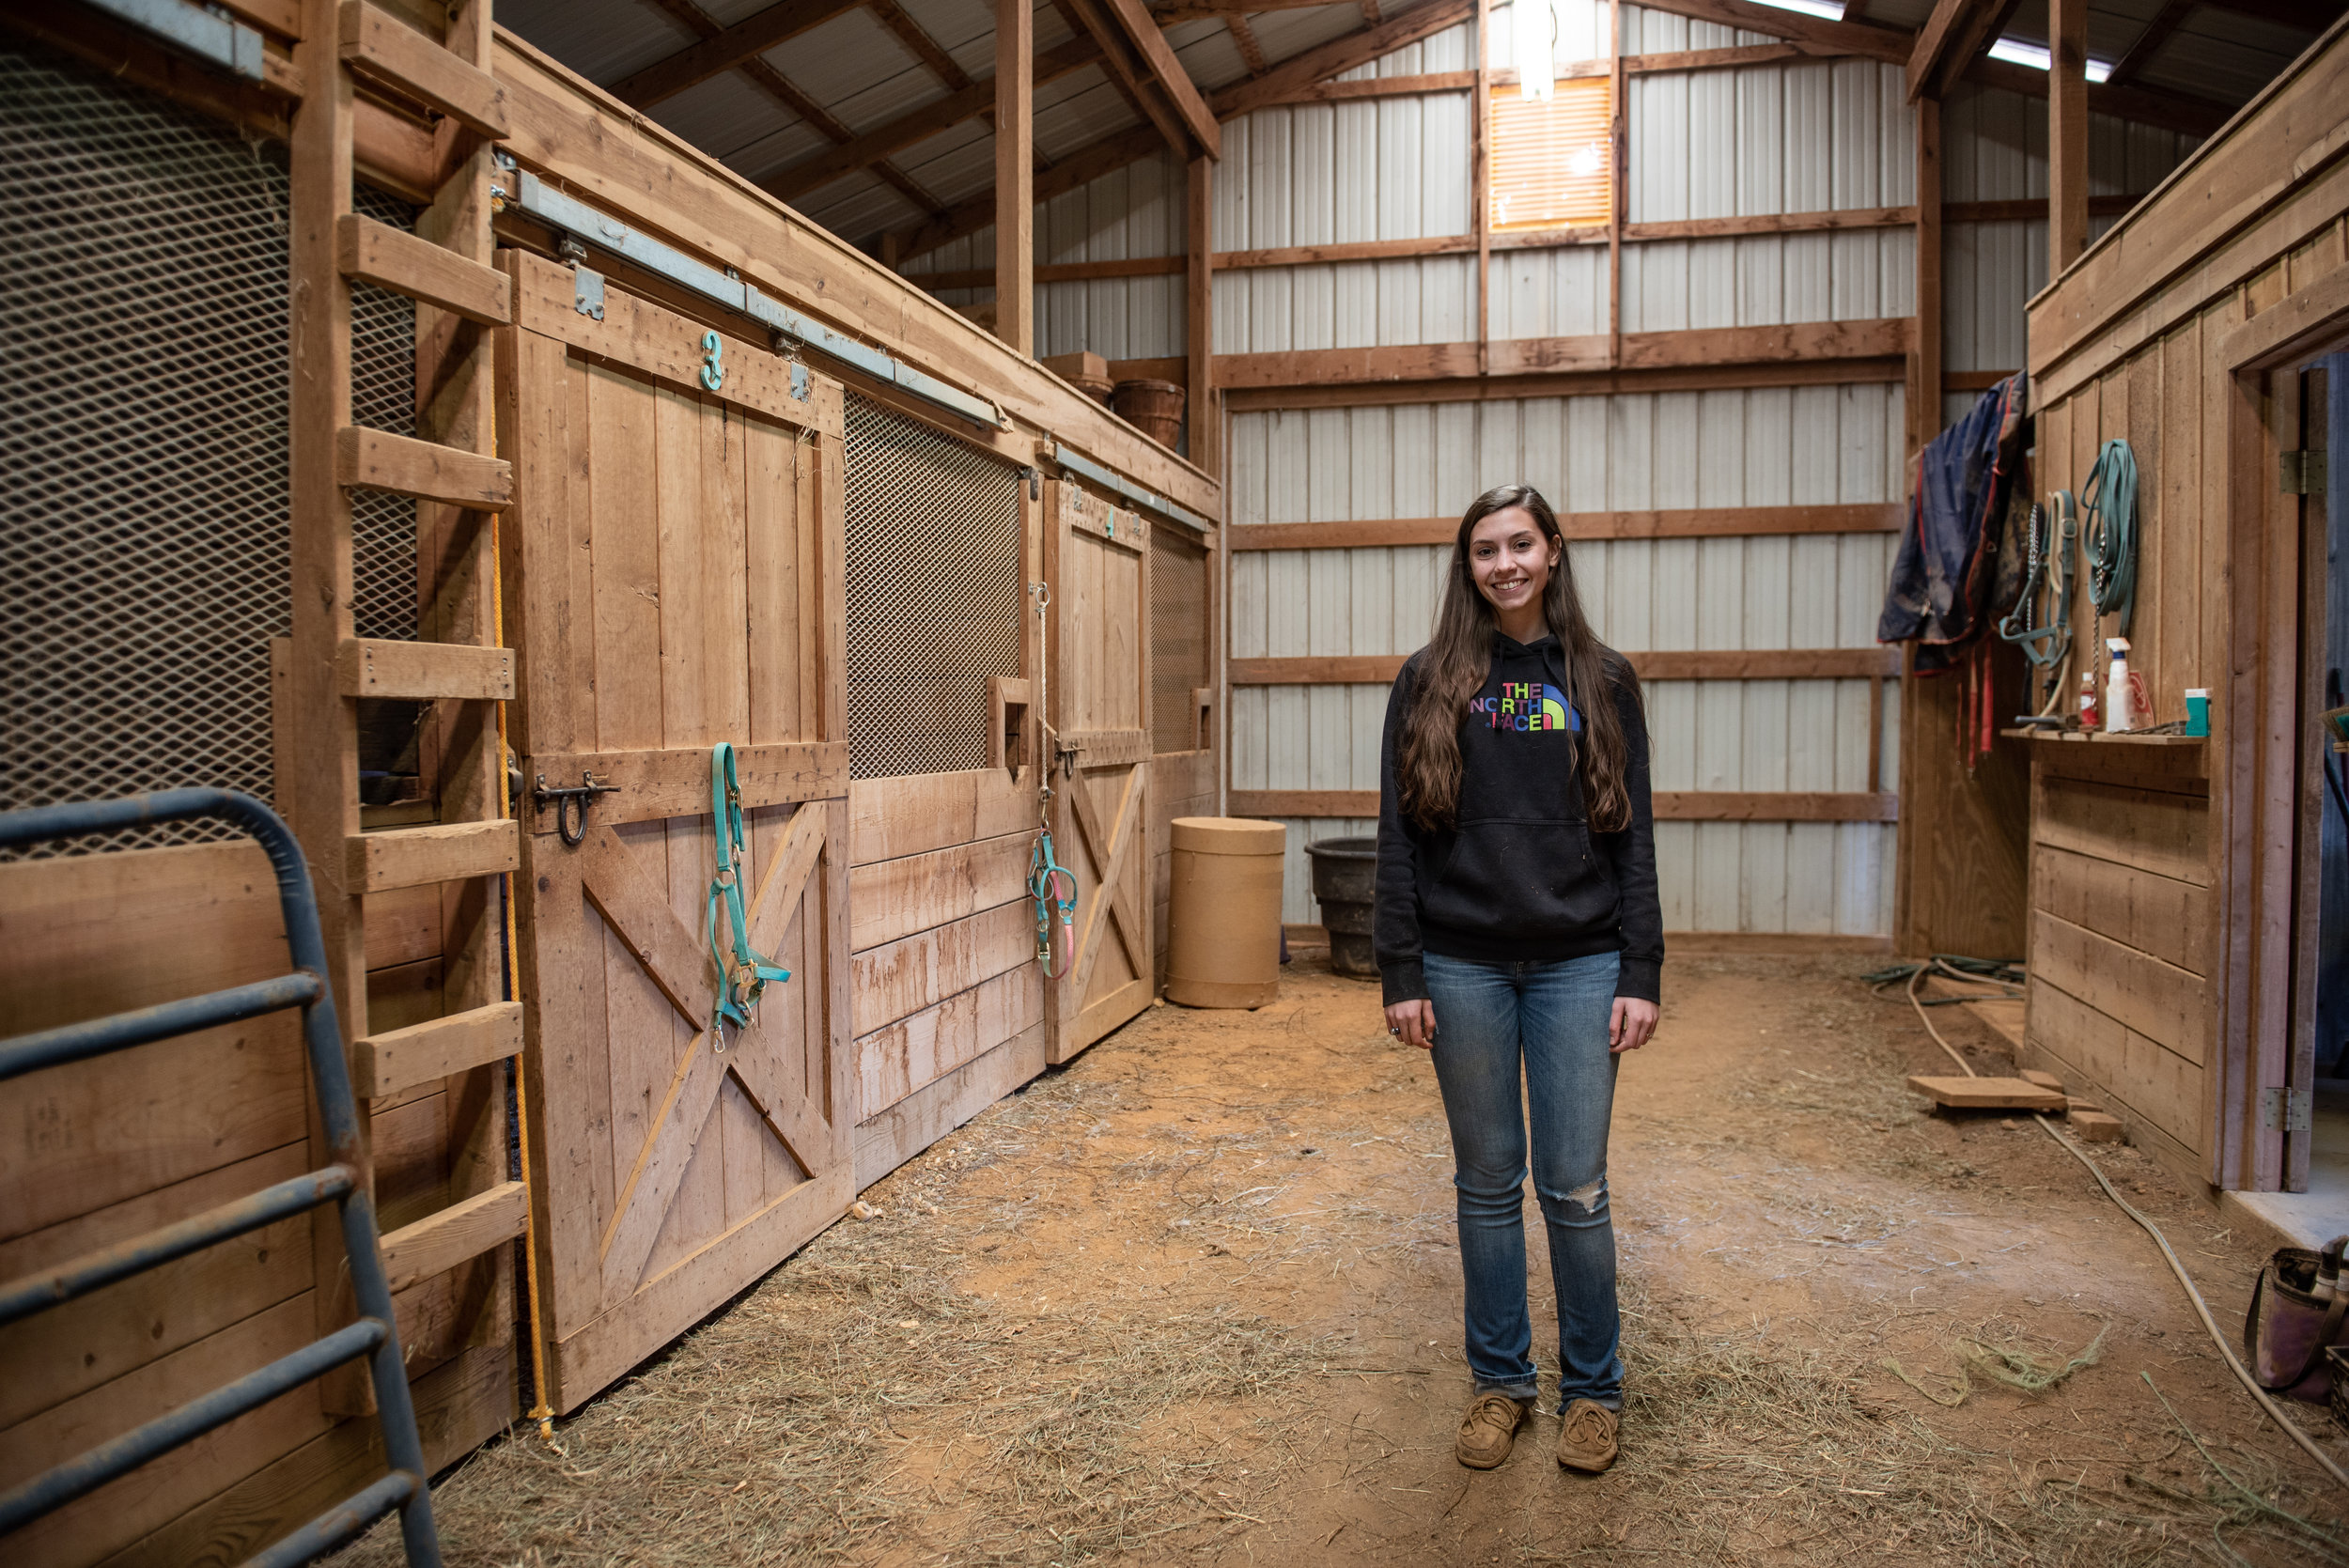  Isabell Grant stands in the barn she rents for her horses, Jetta and Folton. 